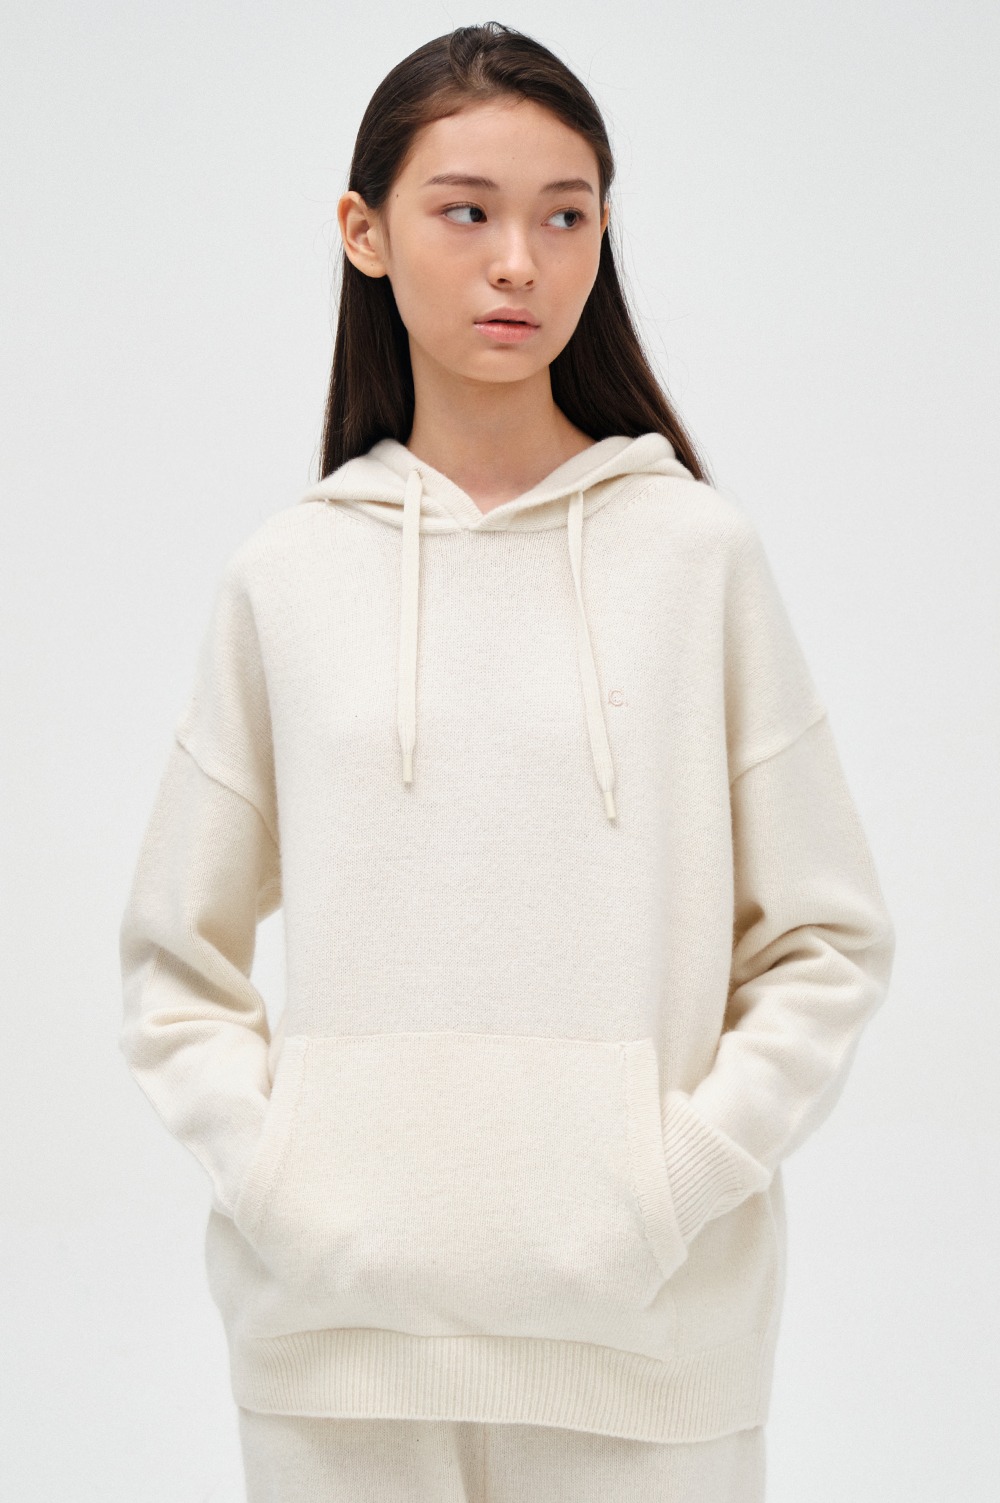 clove - [23FW clove] Knit Hooded Pullover (Ivory)